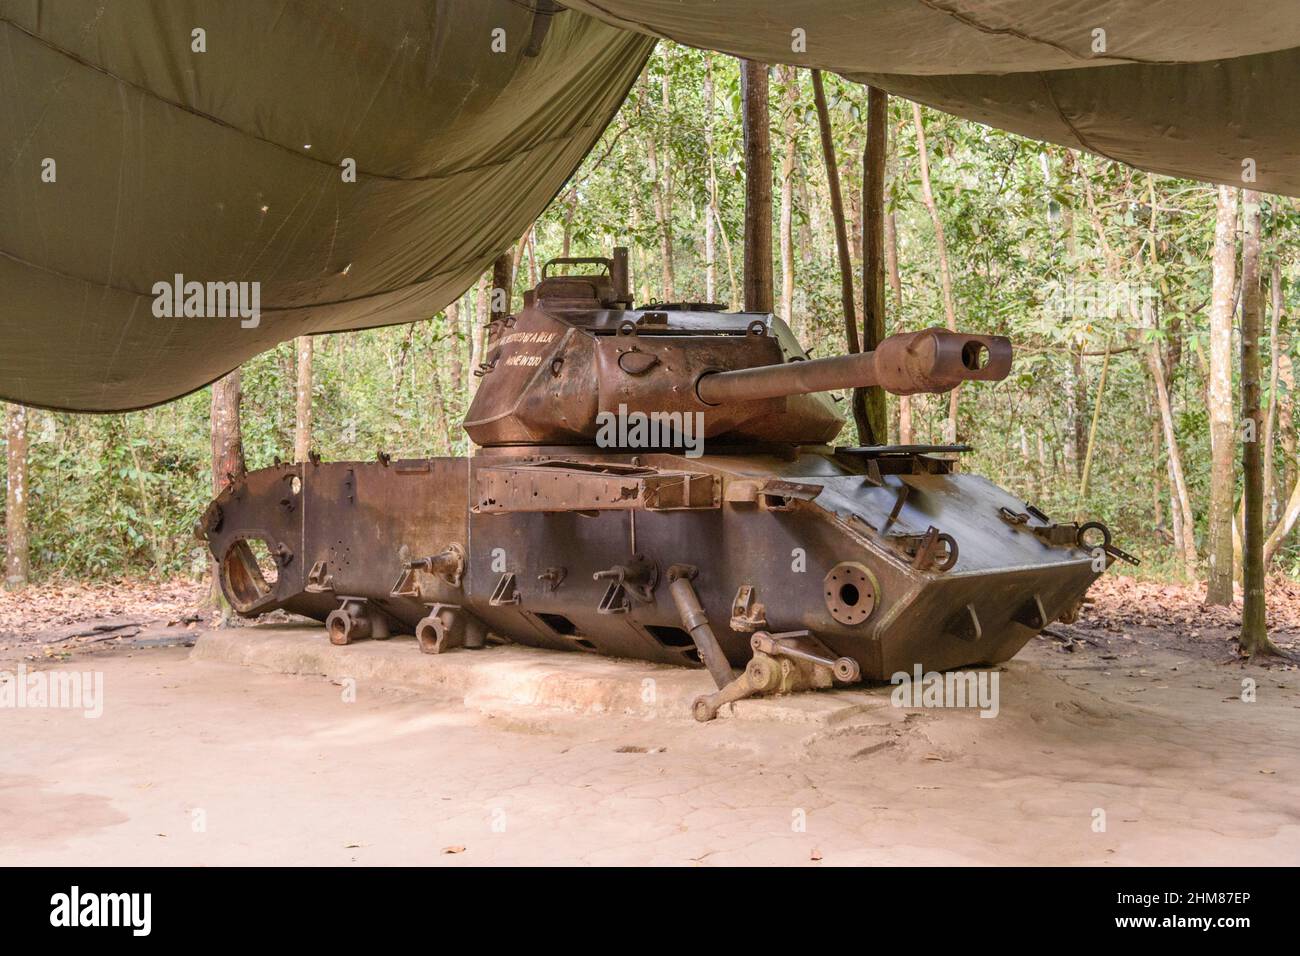 An American tank from the Vietnam War on display at the Cu Chi Tunnel Complex, Cu Chi district, Ho Chi Minh City (Saigon), southern Vietnam Stock Photo